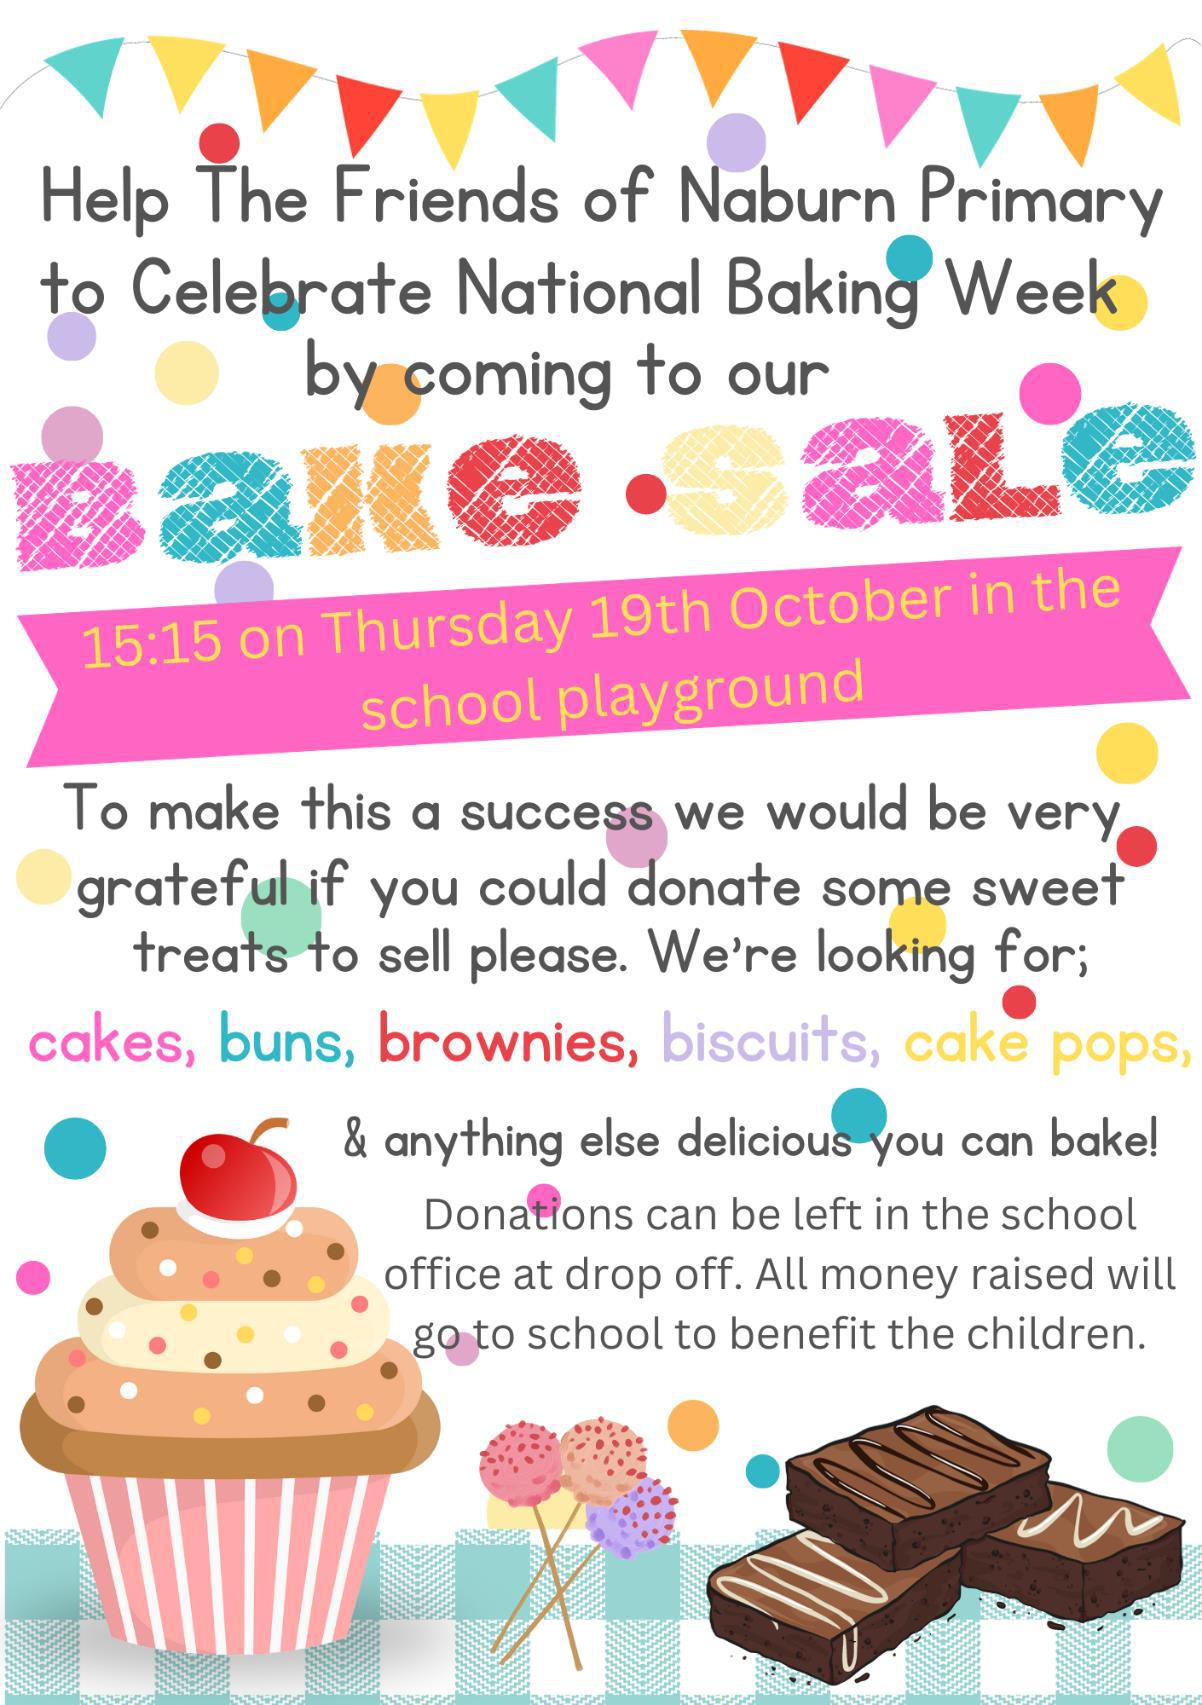 Help the Friends of Naburn Primary to celebrate the National Baking Week by coming to our bake sale. 15:15 on Thursday 19th October in the school playground. To make this a success we would be very grateful if you could donate some sweet treats to sell please. We're looking for: cakes, buns, brownies, biscuits, cake pops and anything else delicious you can bake! Donations can be left in the school office at drop off. All money raised will fo to school to benefit the children.